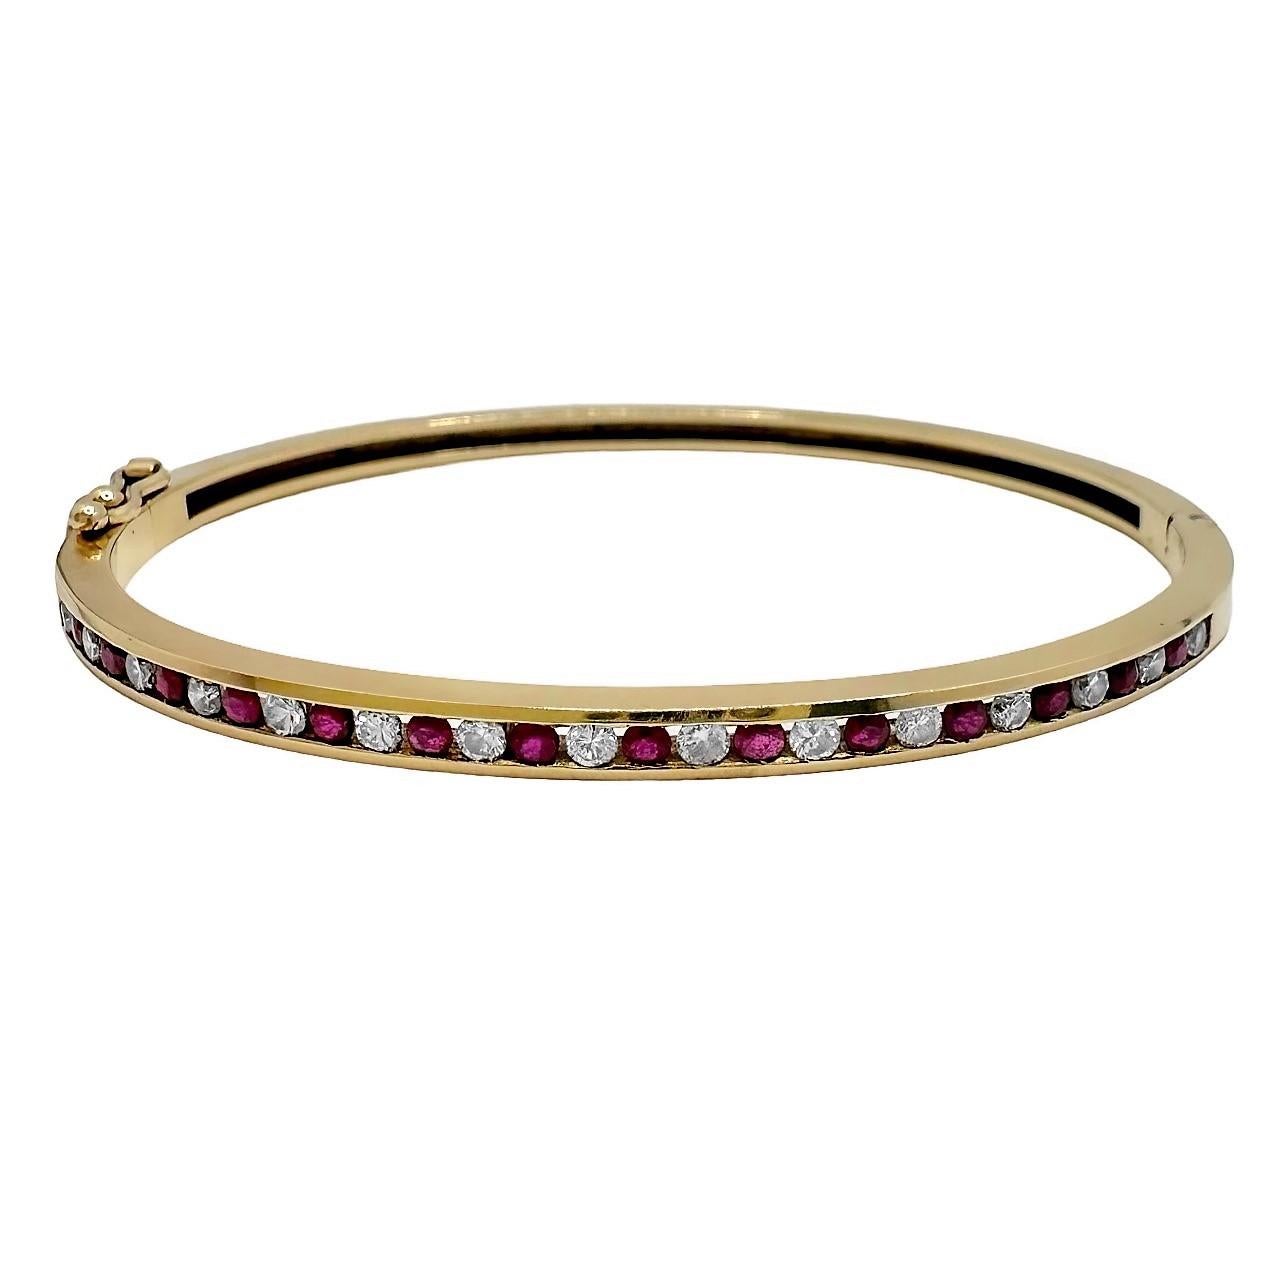 Modern Precision Crafted Channel Set Yellow Gold Ruby and Diamond Bangle Bracelet